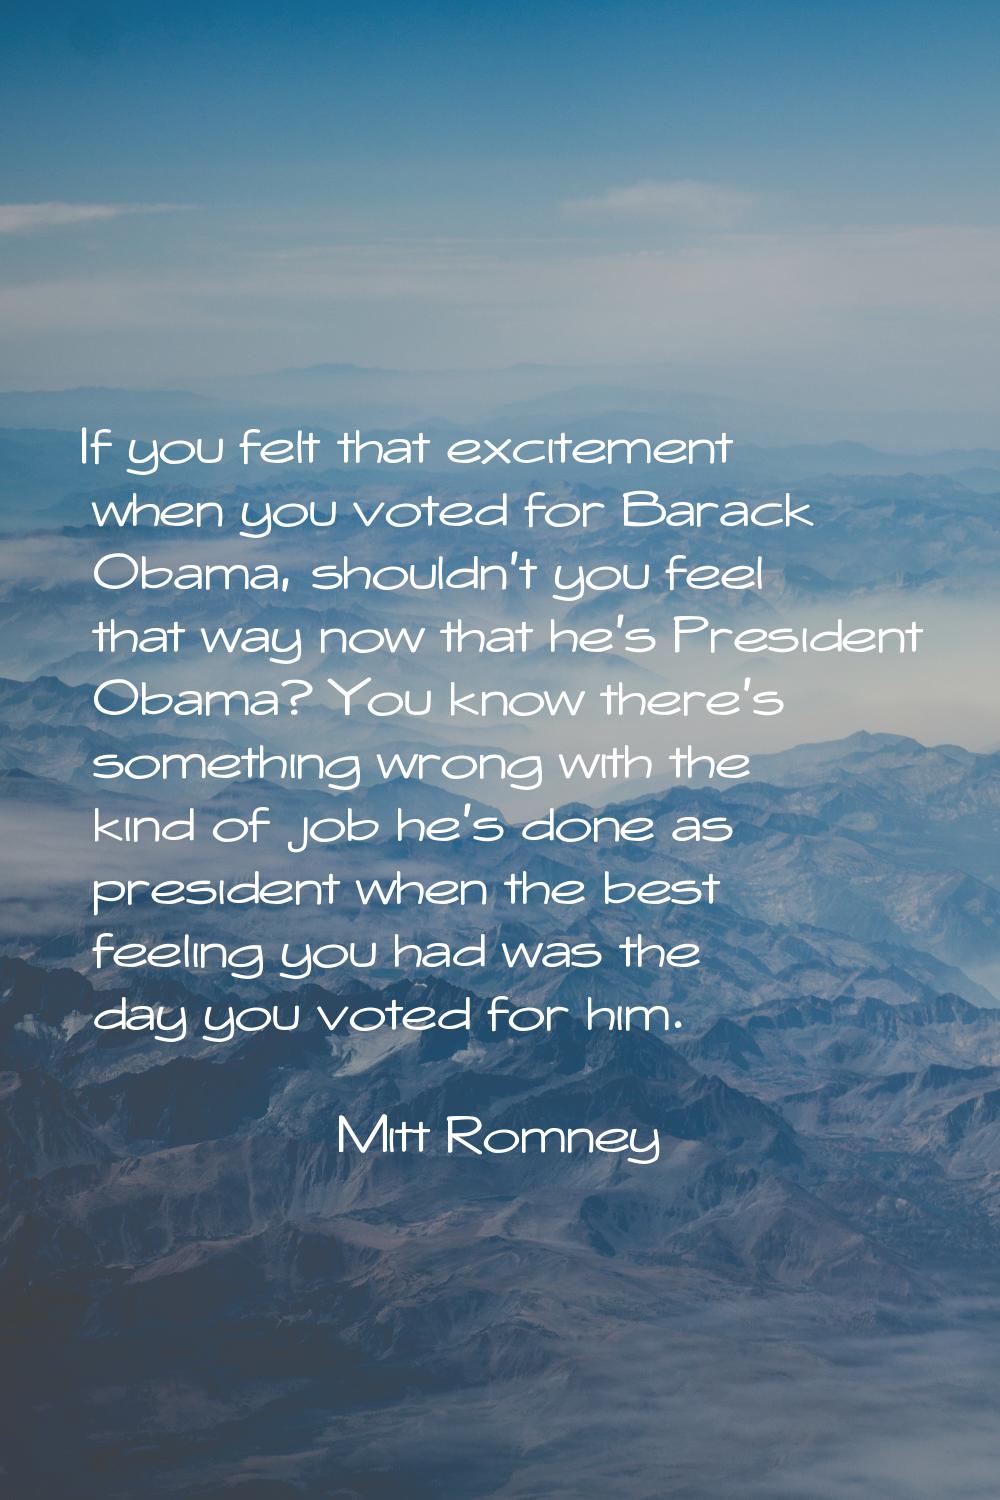 If you felt that excitement when you voted for Barack Obama, shouldn't you feel that way now that h